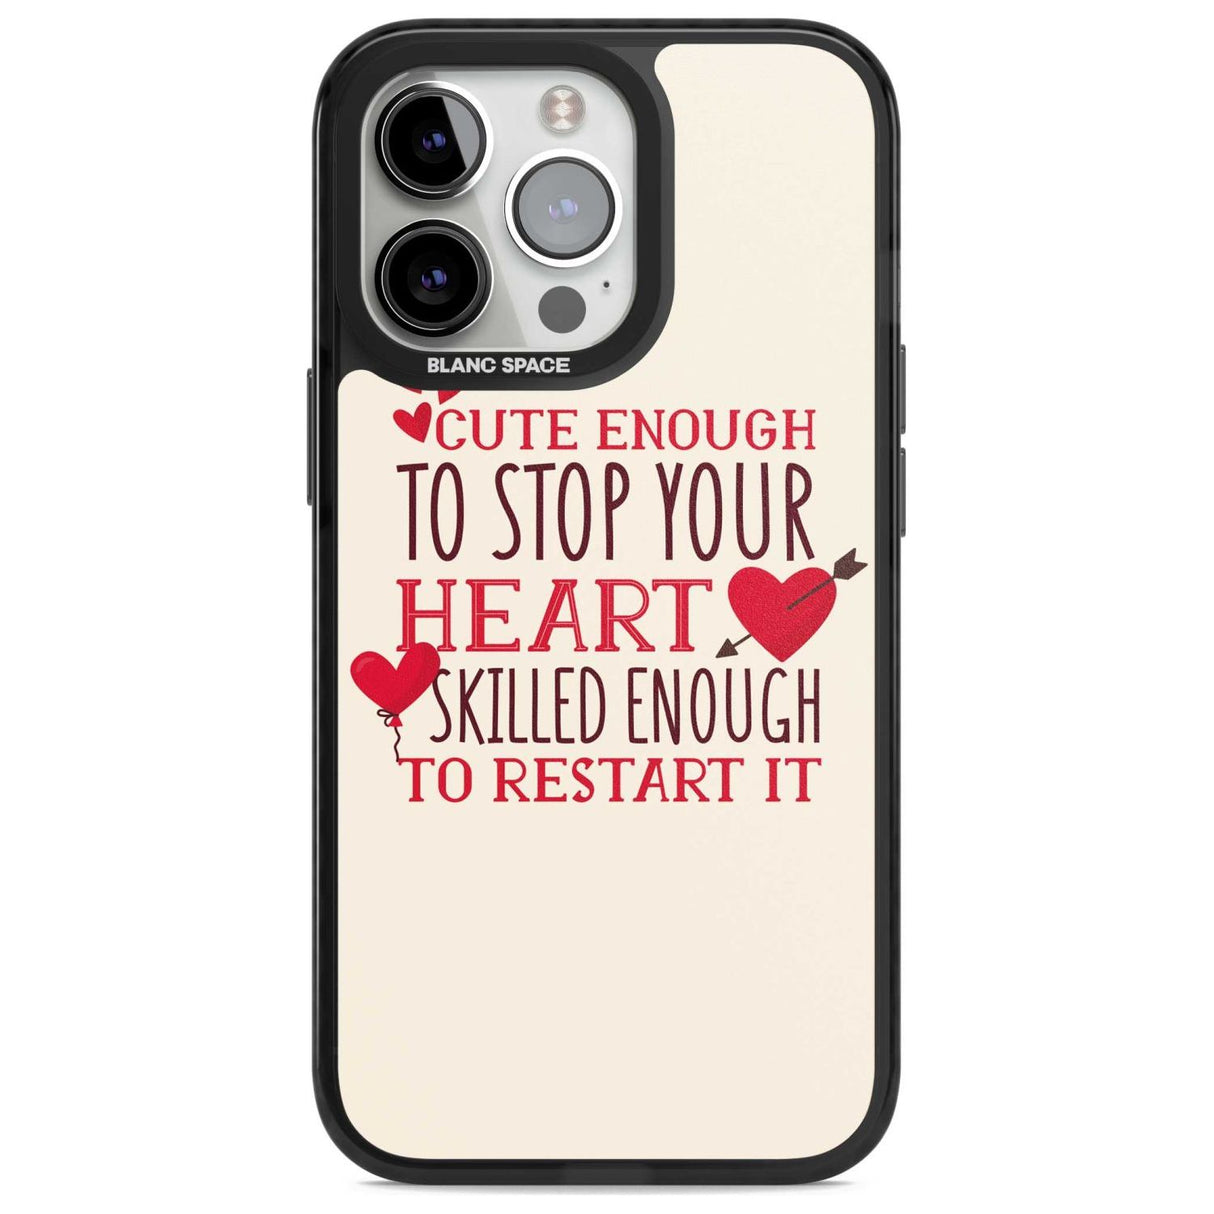 Medical Design Cute Enough to Stop Your Heart Phone Case iPhone 15 Pro Max / Magsafe Black Impact Case,iPhone 15 Pro / Magsafe Black Impact Case,iPhone 14 Pro Max / Magsafe Black Impact Case,iPhone 14 Pro / Magsafe Black Impact Case,iPhone 13 Pro / Magsafe Black Impact Case Blanc Space